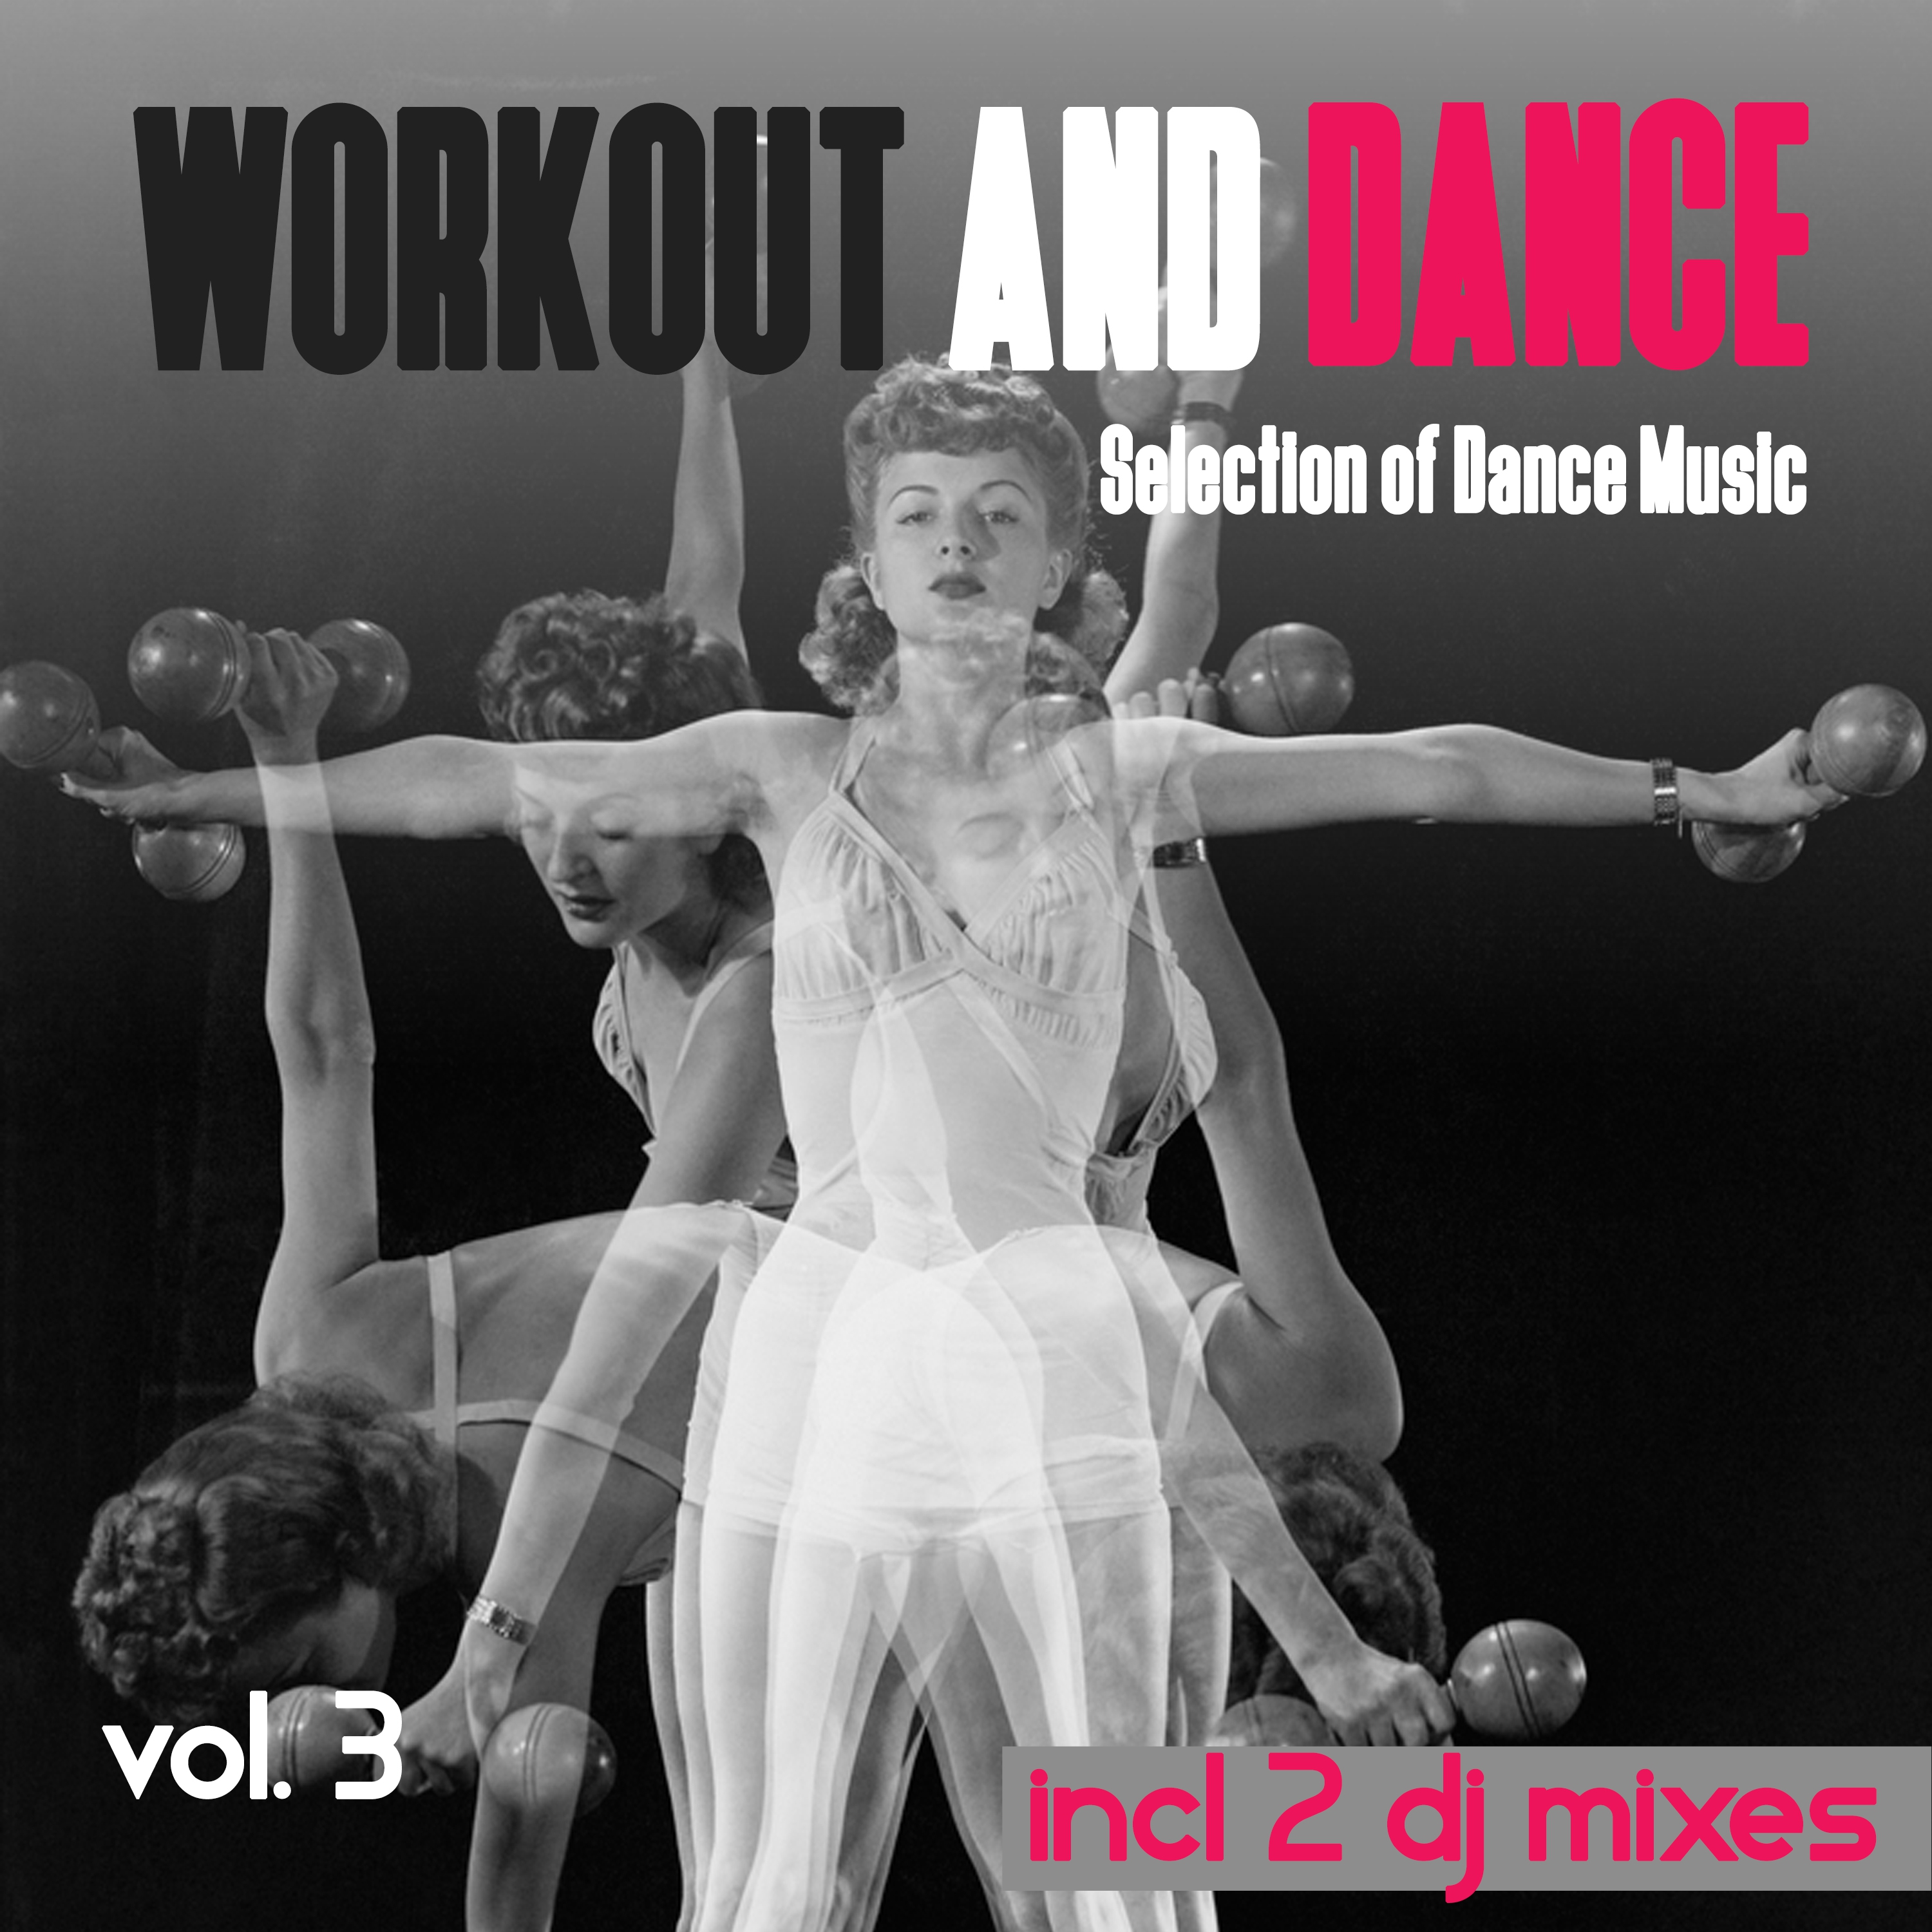 Workout and Dance, Vol. 3 - Selection of Dance Music